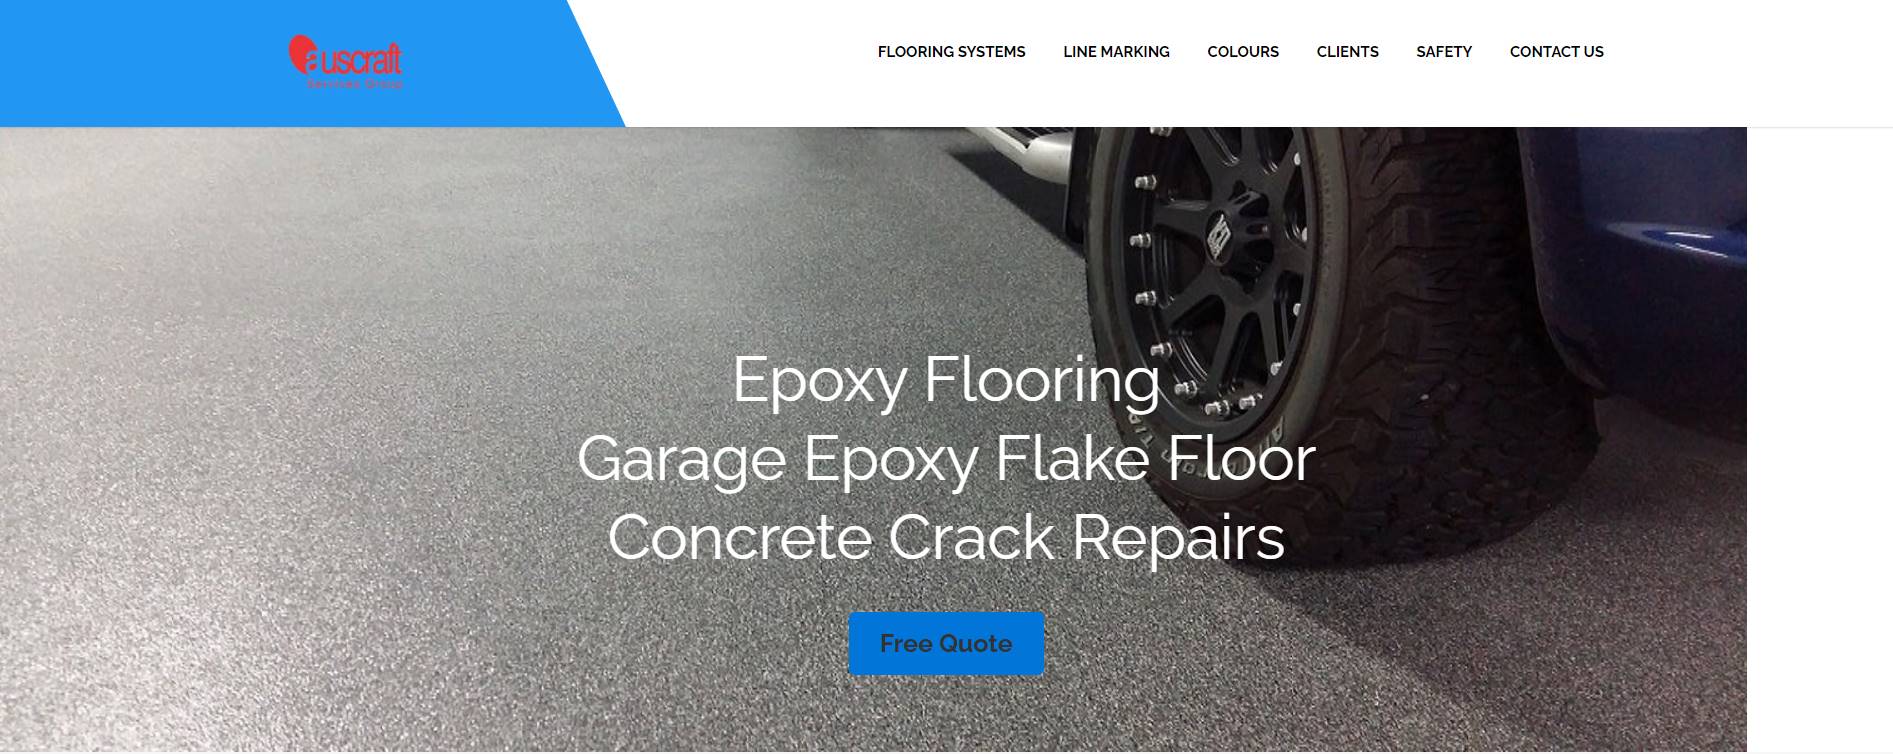 auscraft services epoxy flooring and coatings melbourne